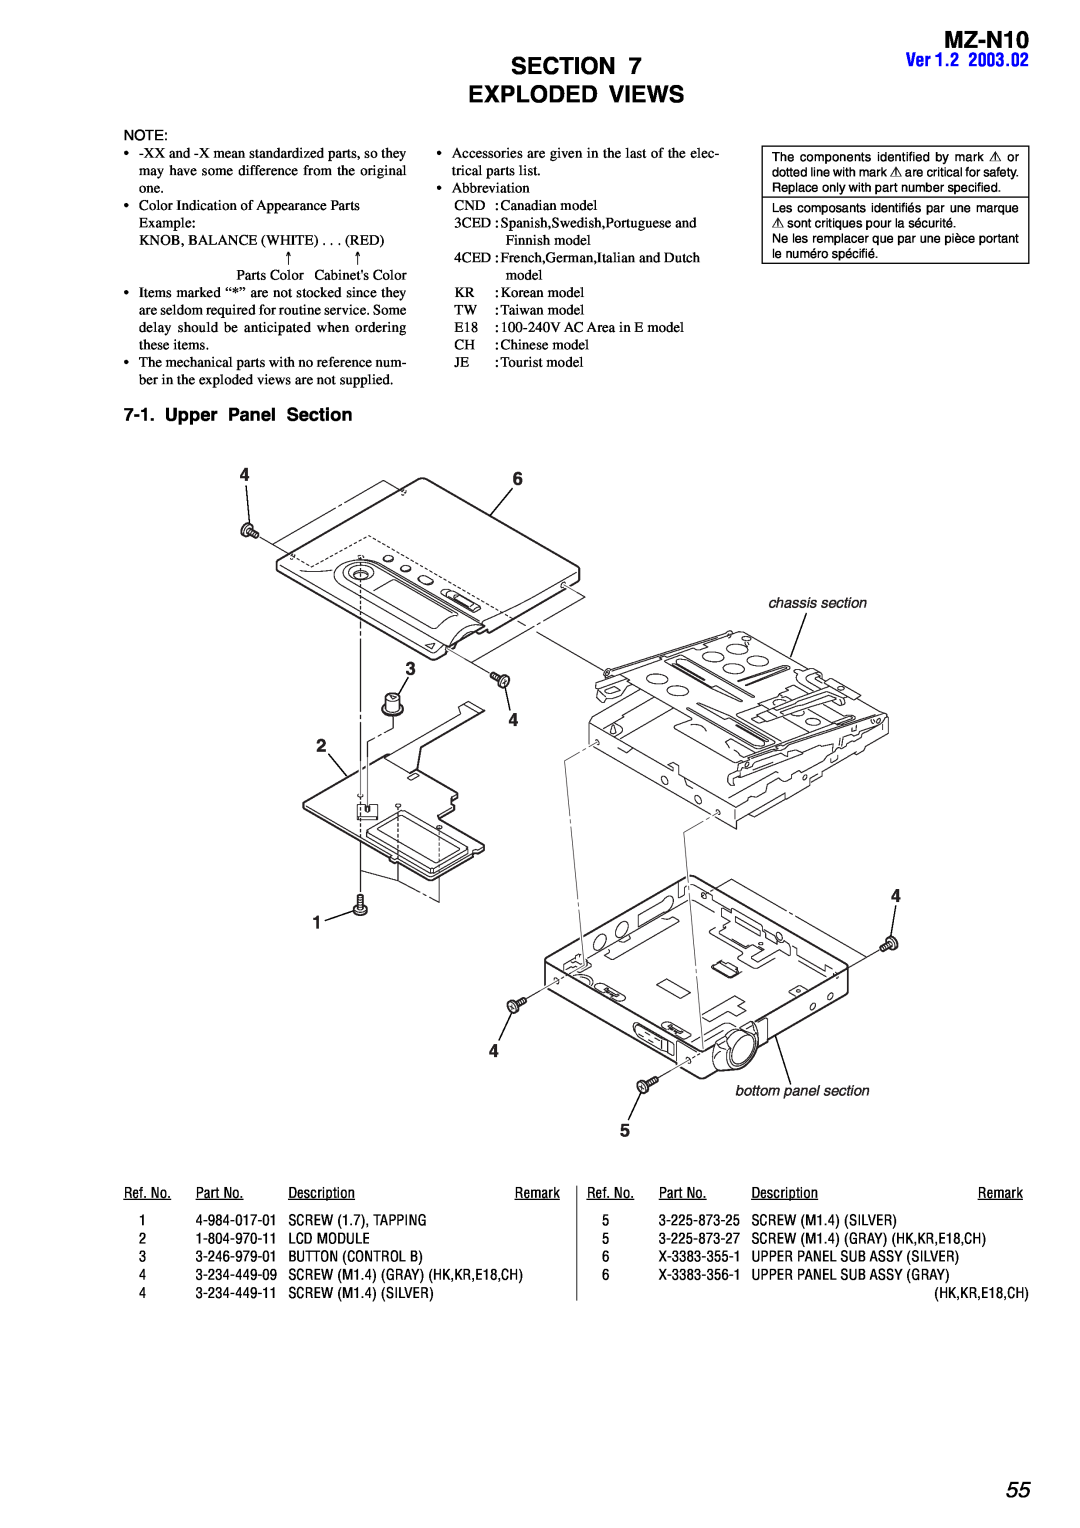 Sony MZ-N10 service manual Section Exploded Views, Ver, Upper Panel Section, chassis section, bottom panel section 